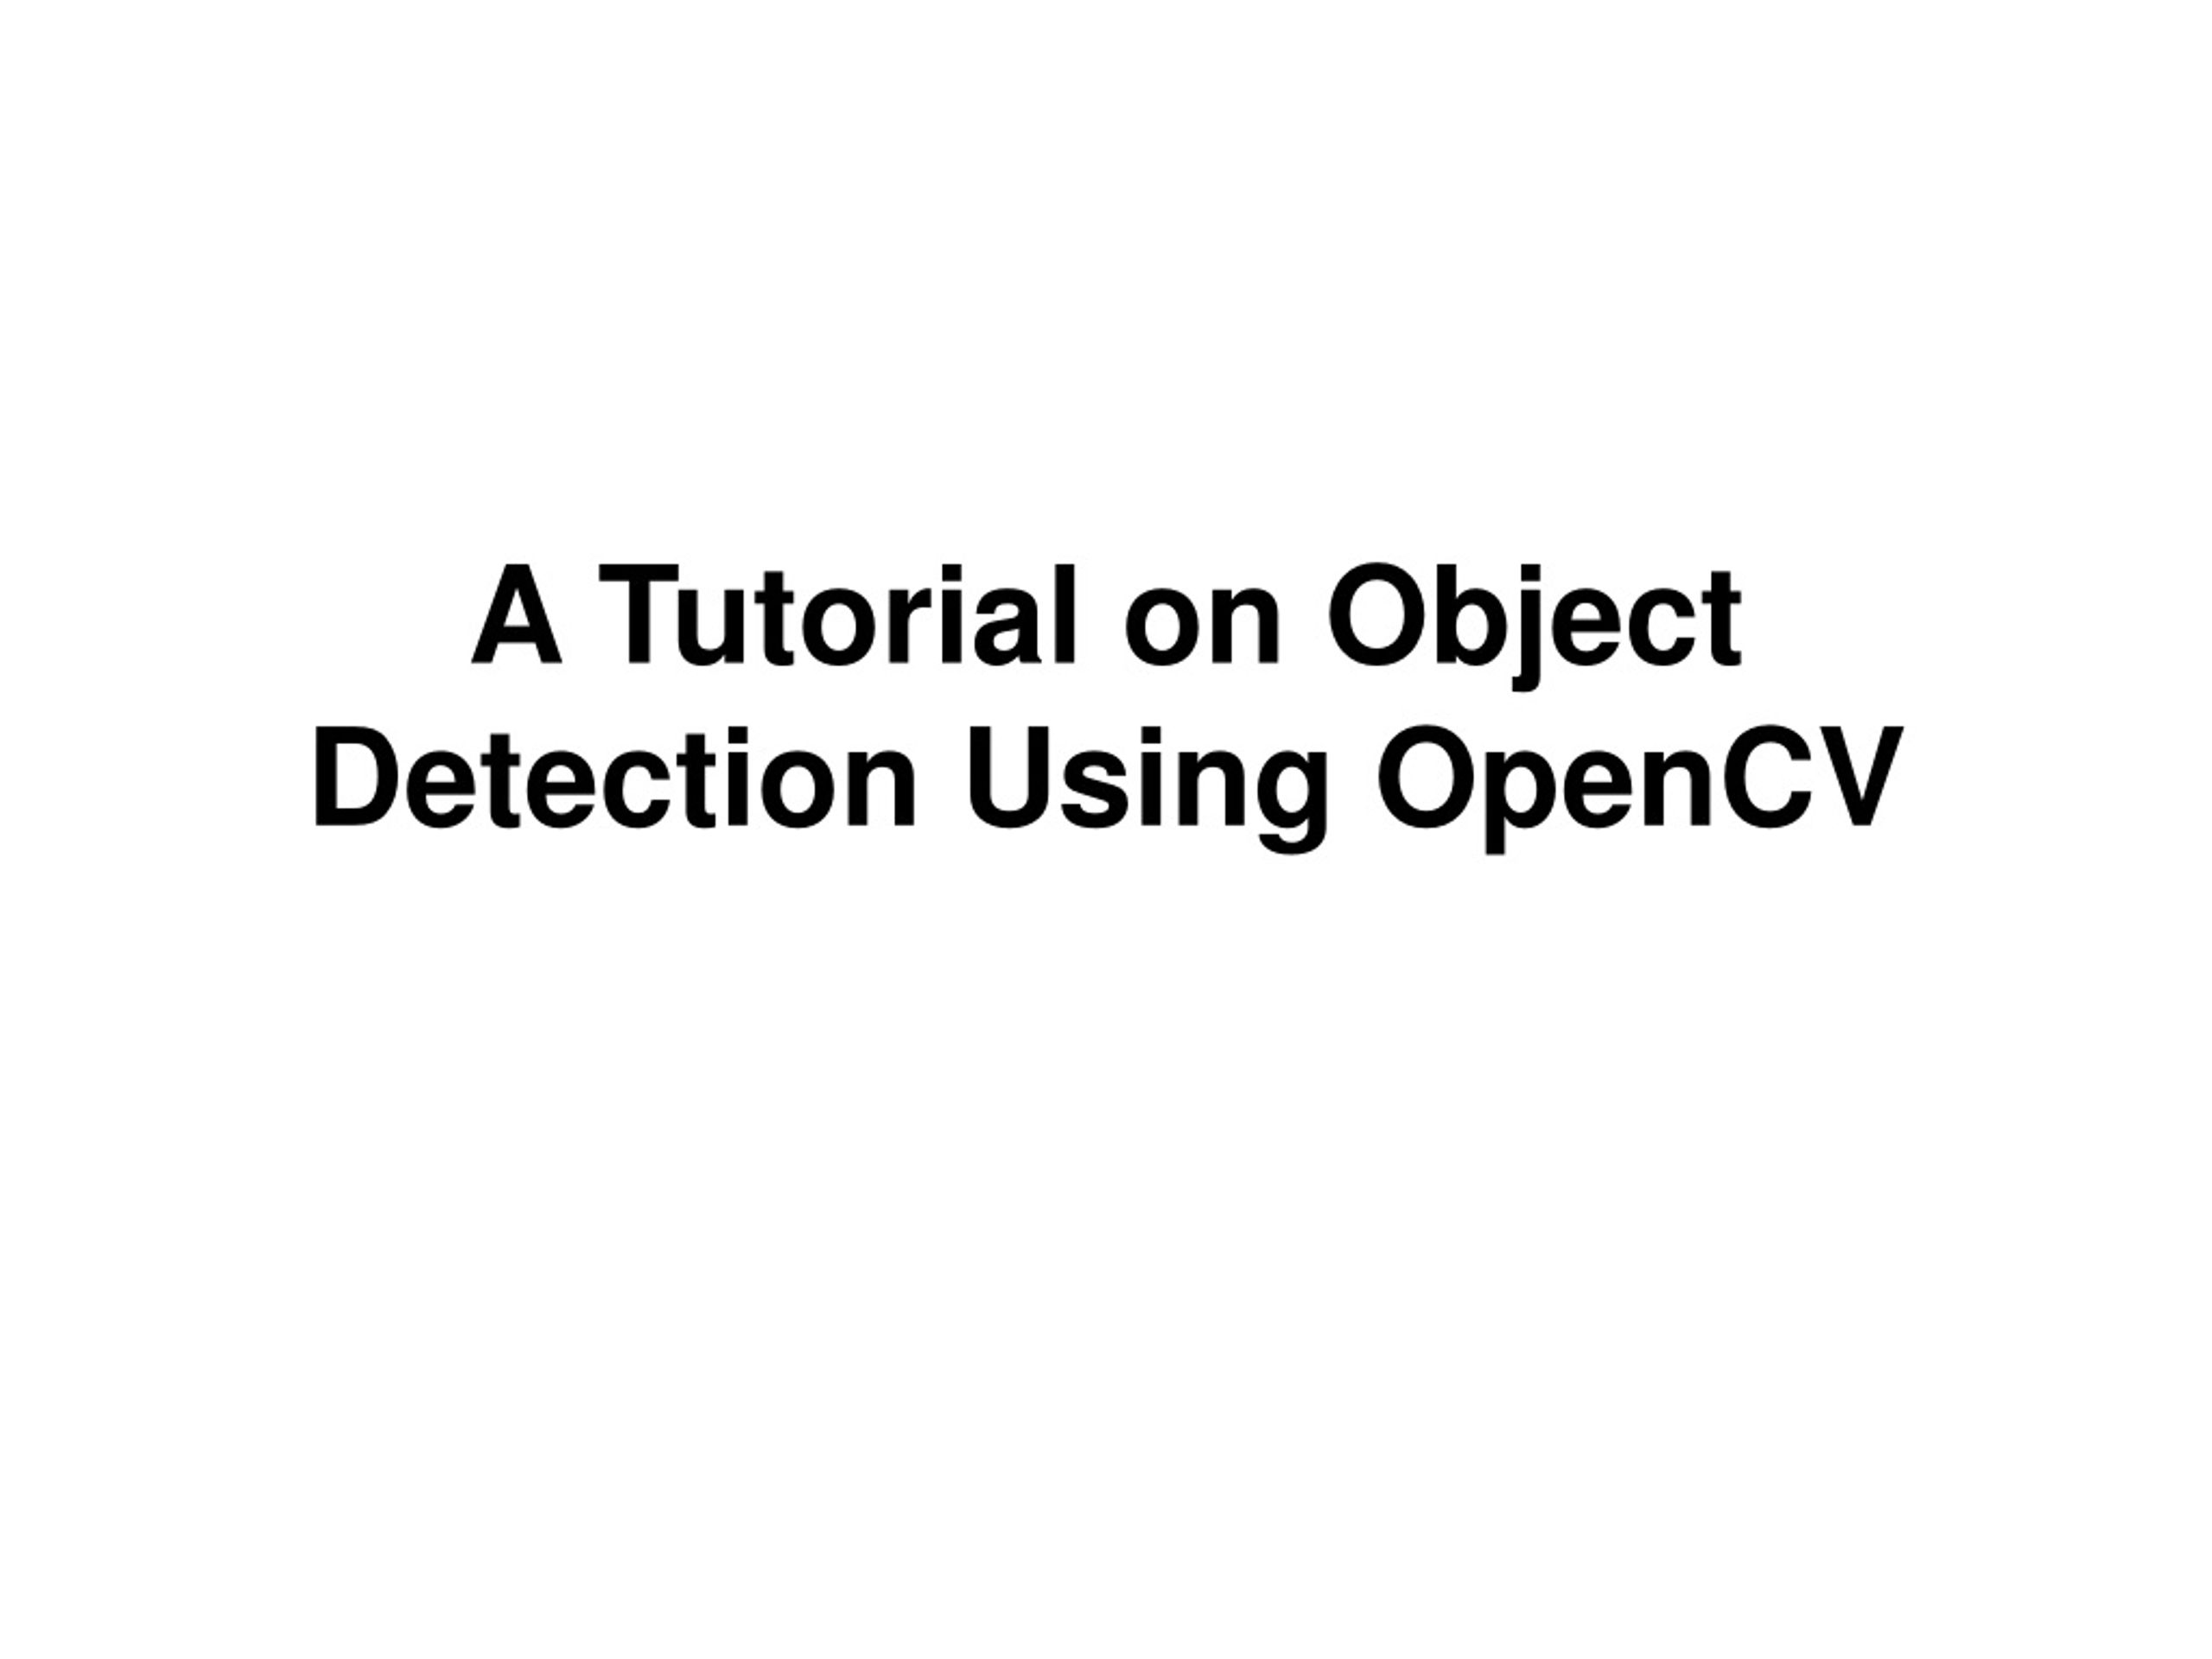 Object detected